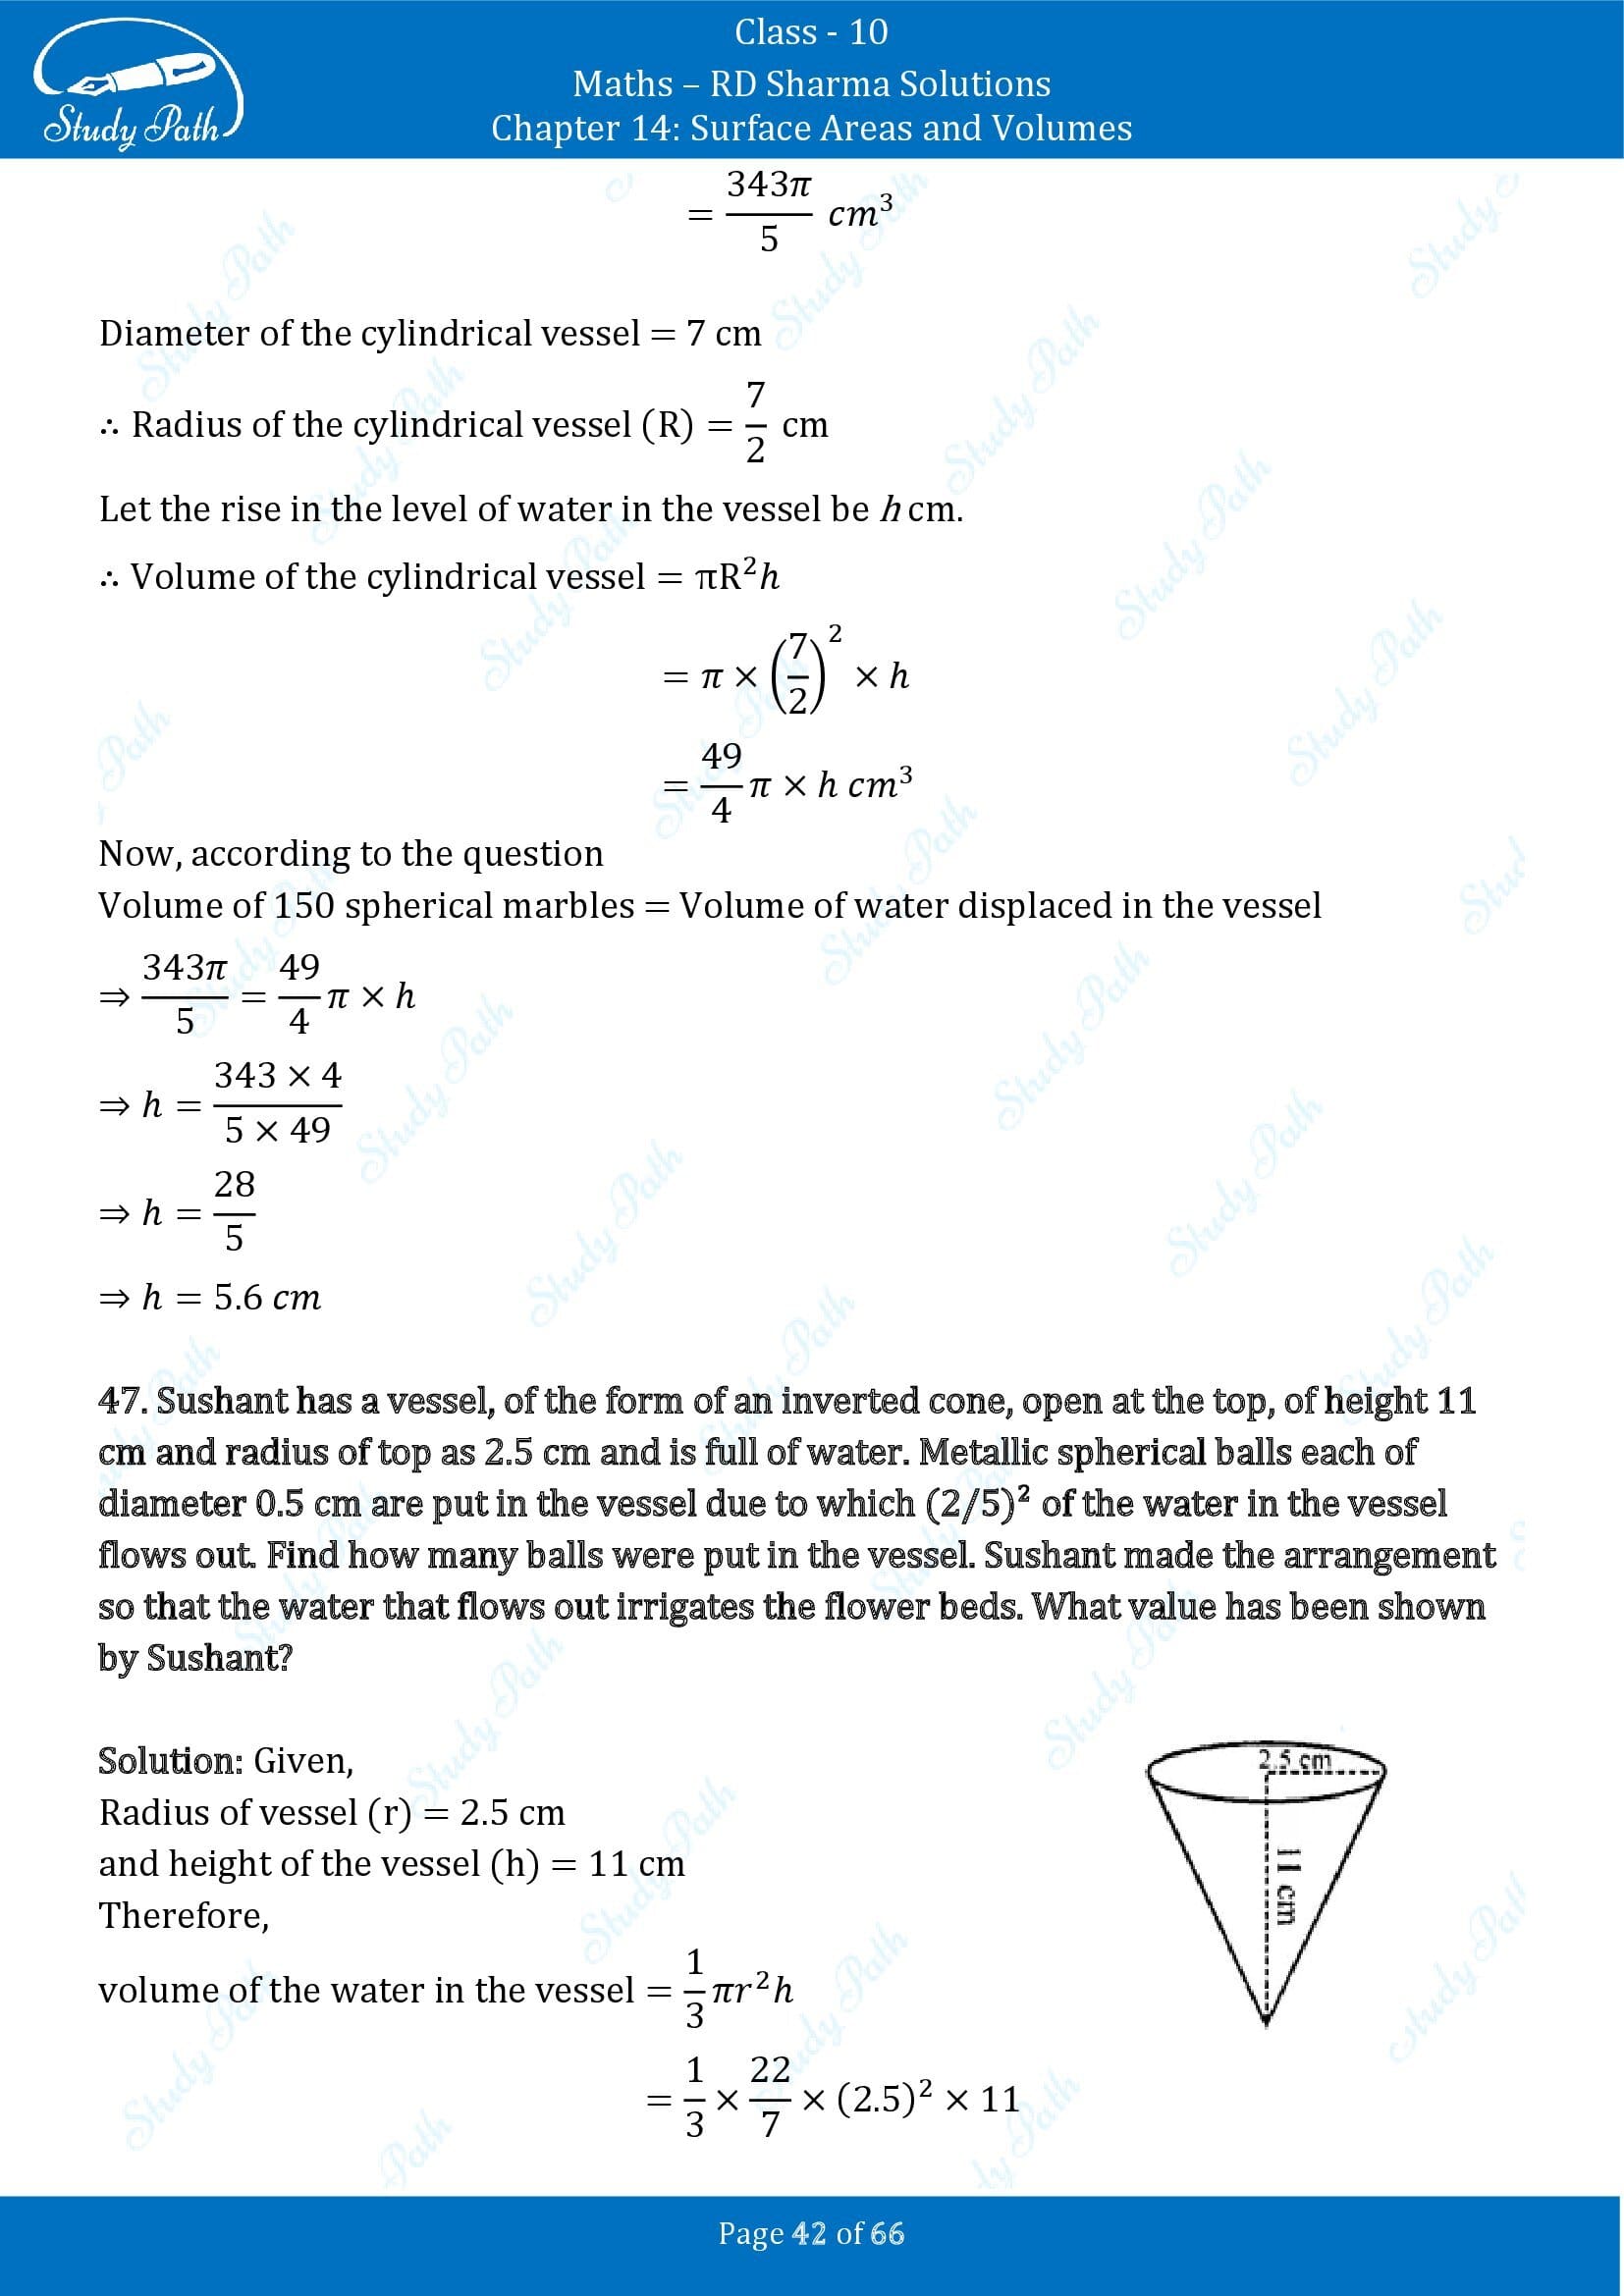 RD Sharma Solutions Class 10 Chapter 14 Surface Areas and Volumes Exercise 14.1 00042